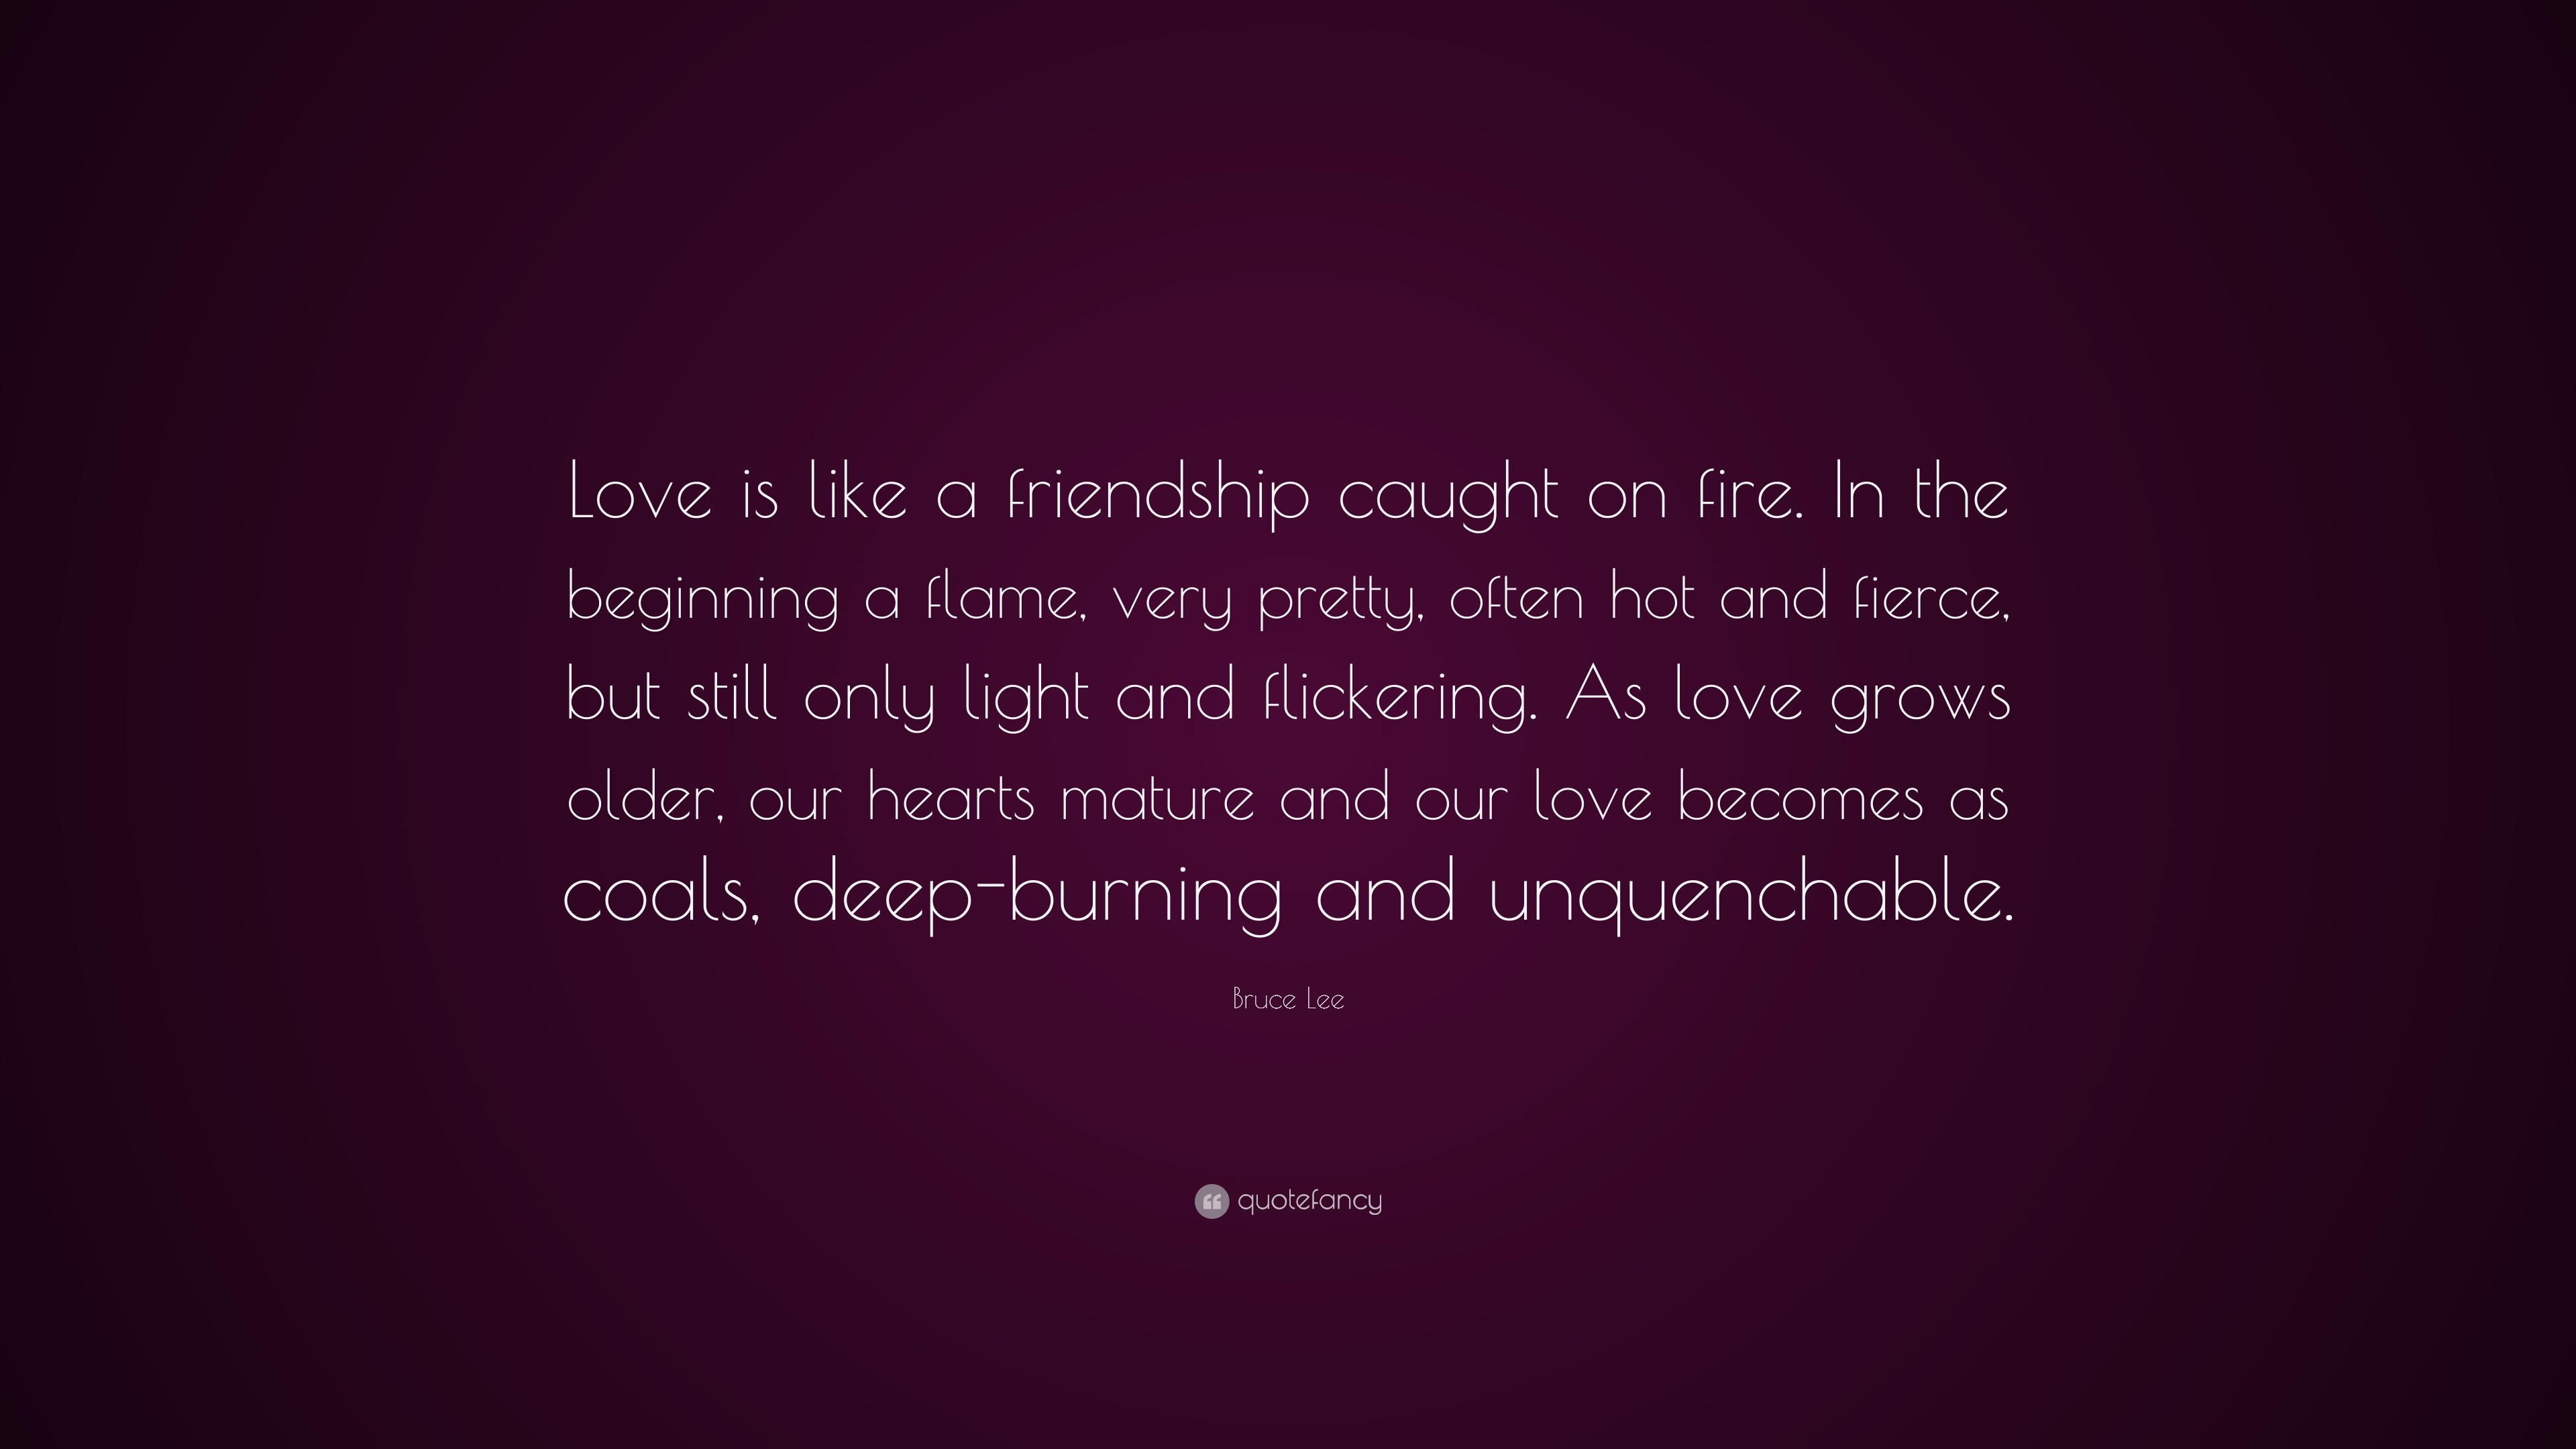 Bruce Lee Quote “Love is like a friendship caught on fire In the